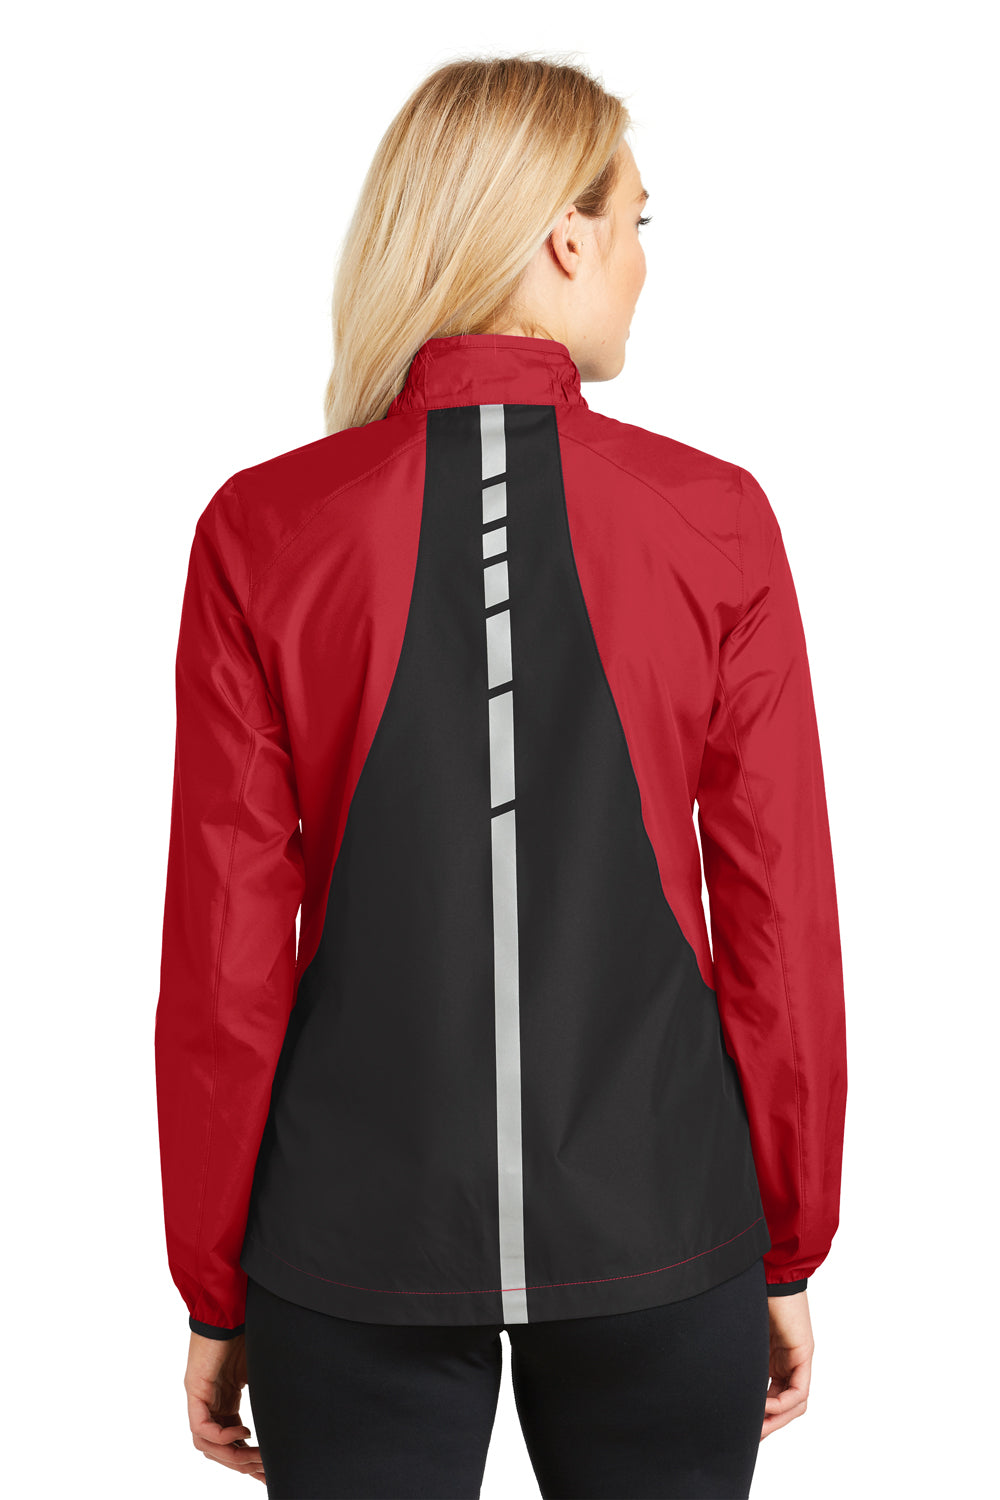 Port Authority L345 Womens Zephyr Reflective Hit Wind & Water Resistant Full Zip Jacket Red Back